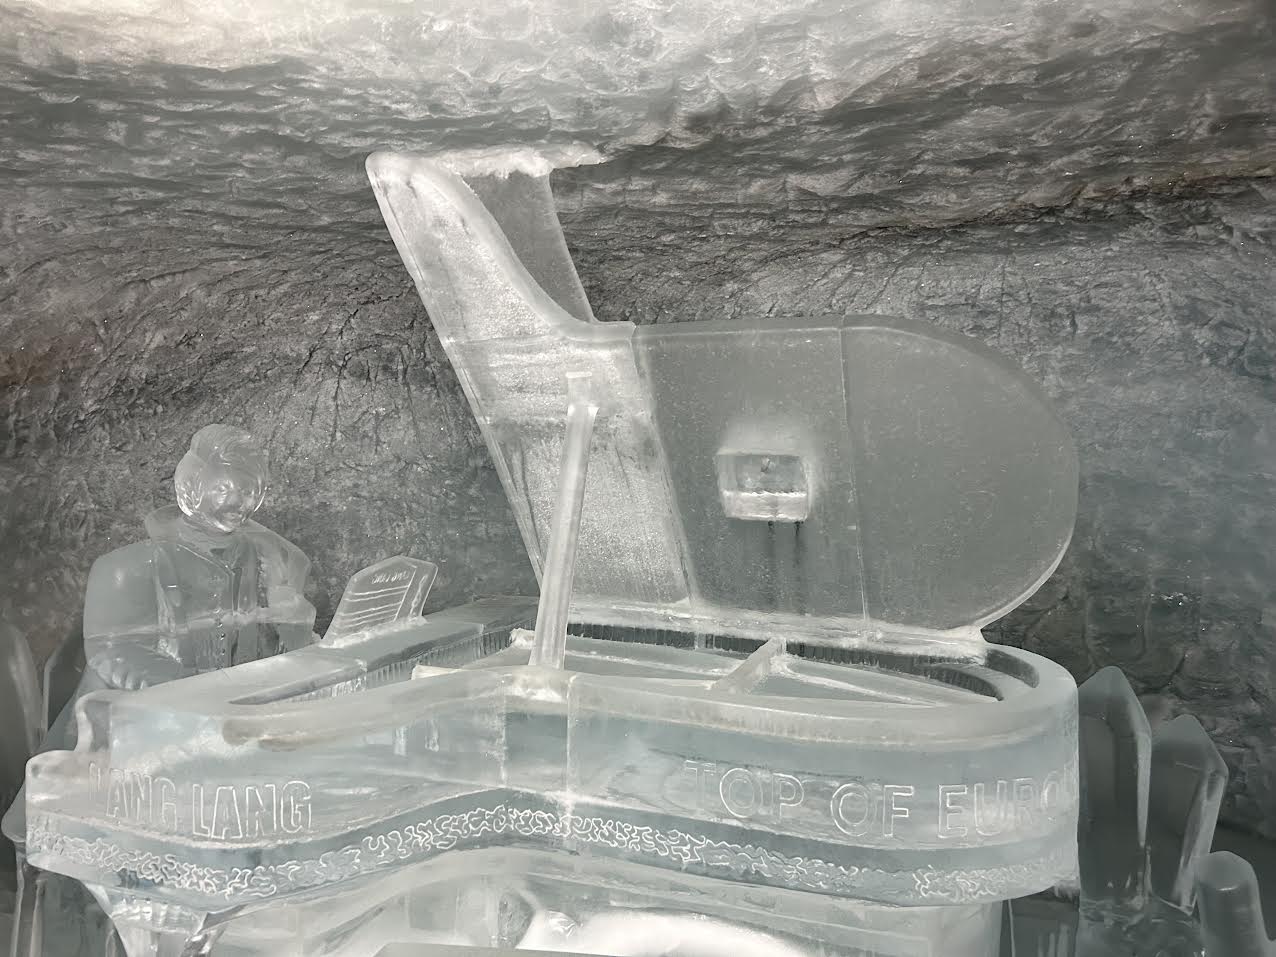 Pianist ice carving in Jungfrau ice palace